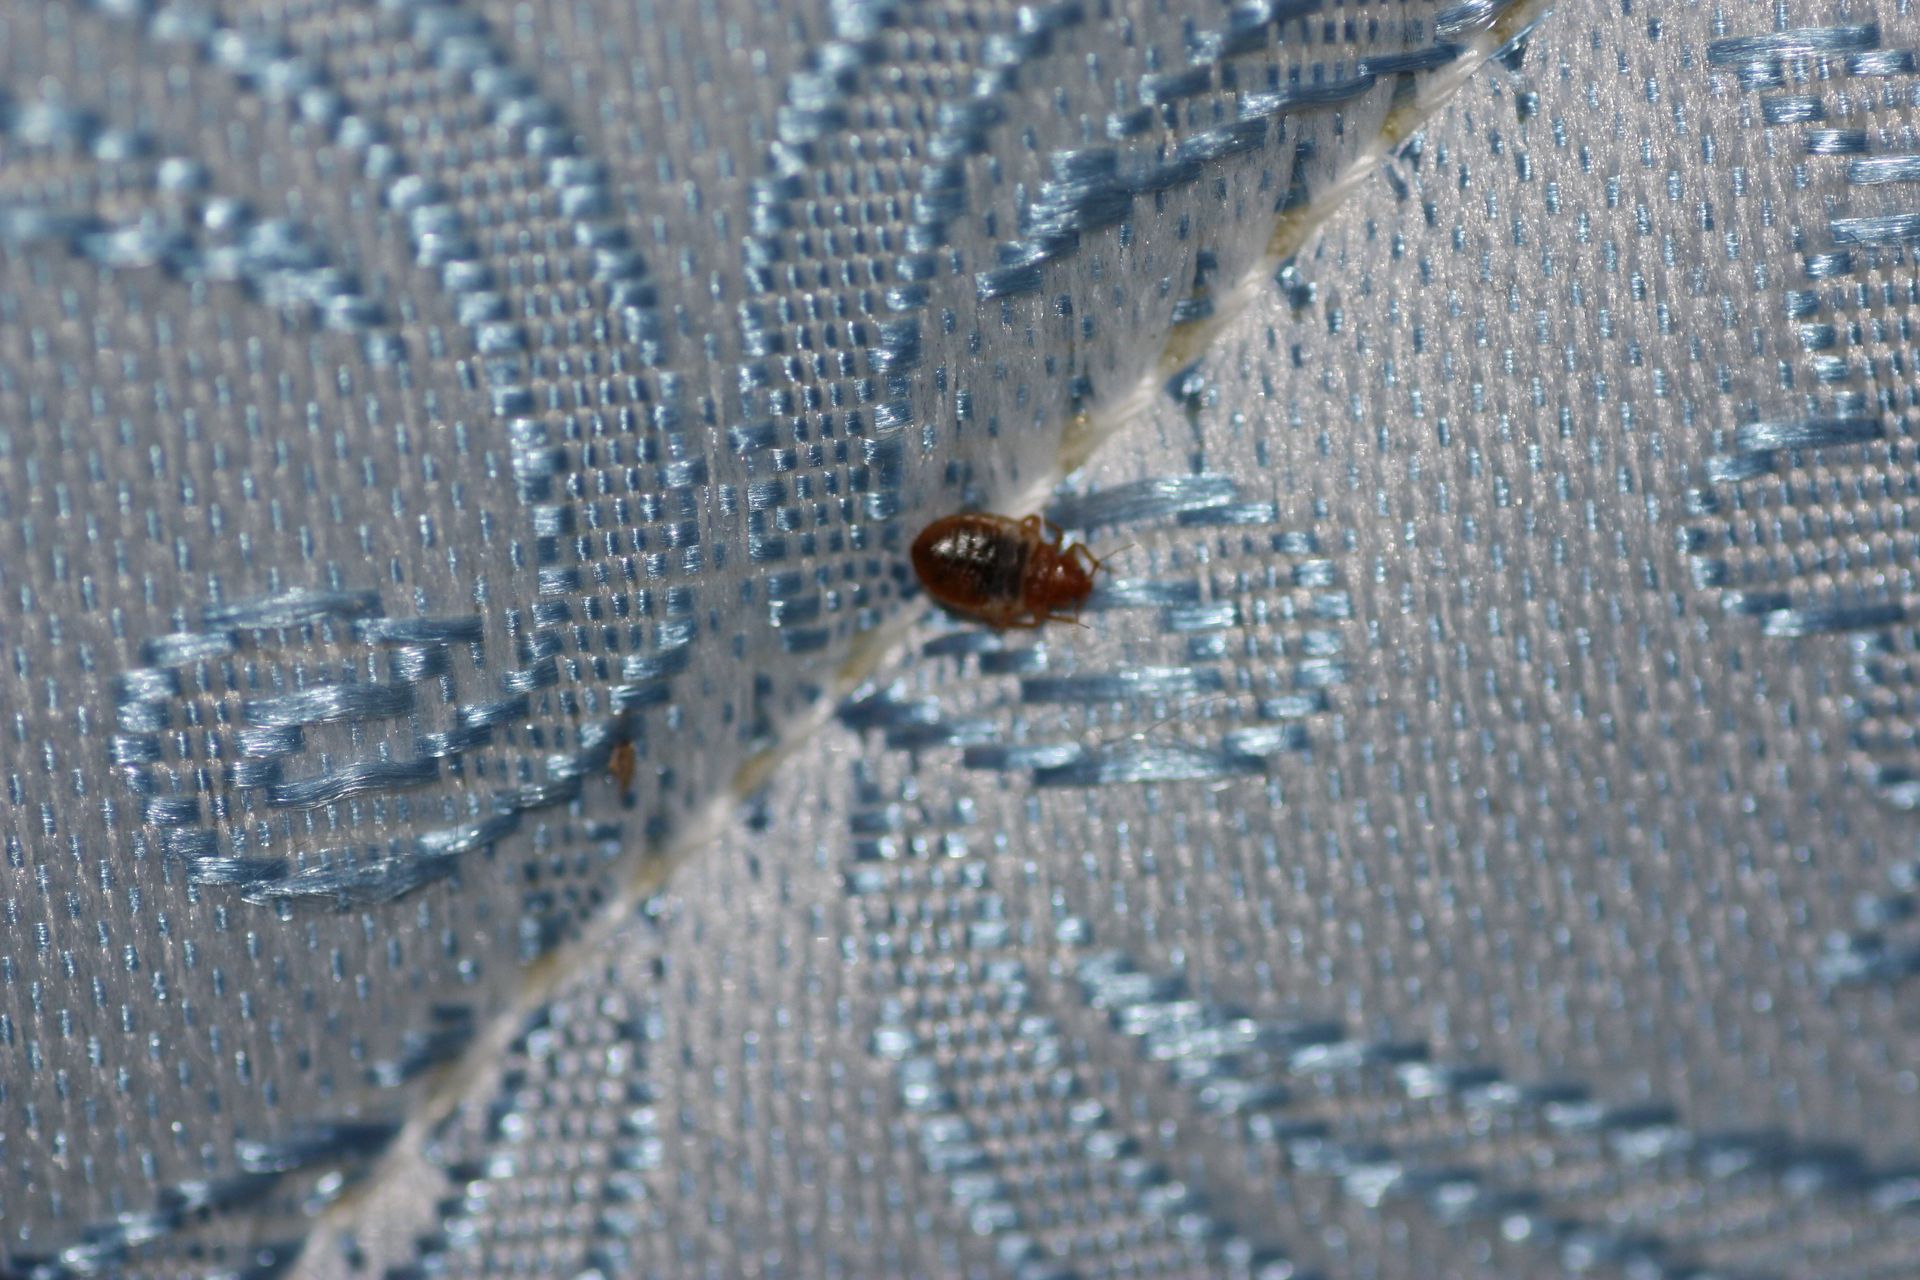 small bed bug crawling on fabric